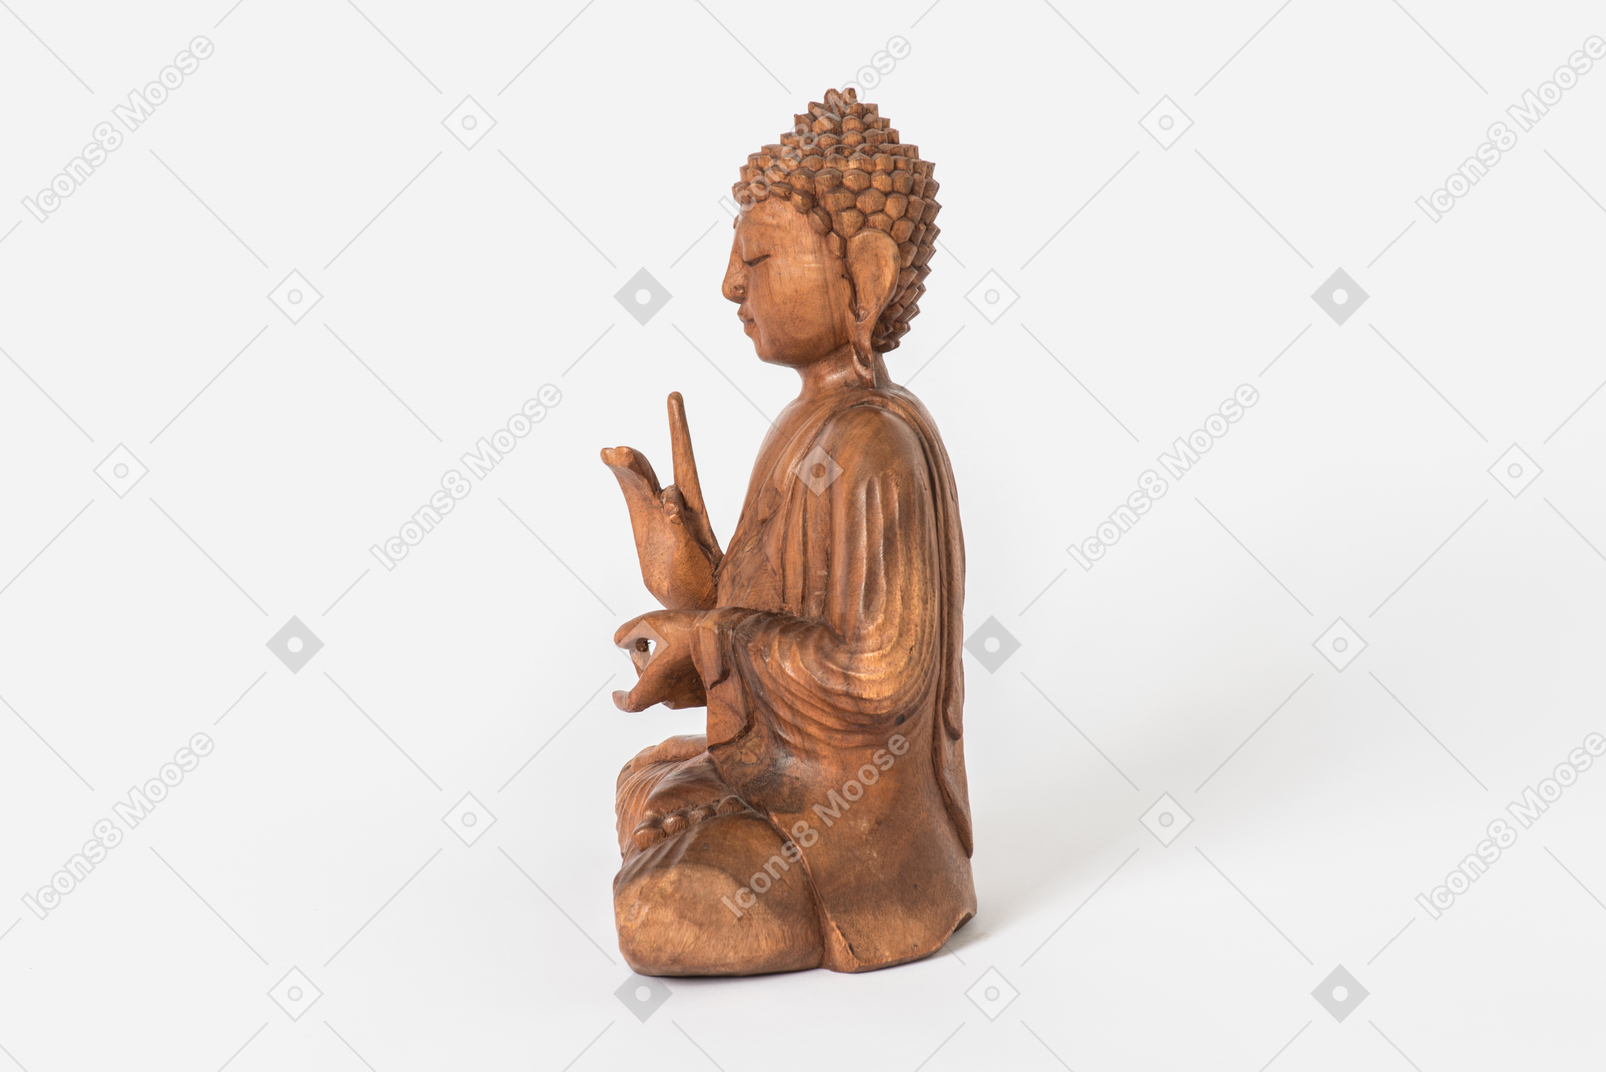 Buddha statue placed in profile on white background